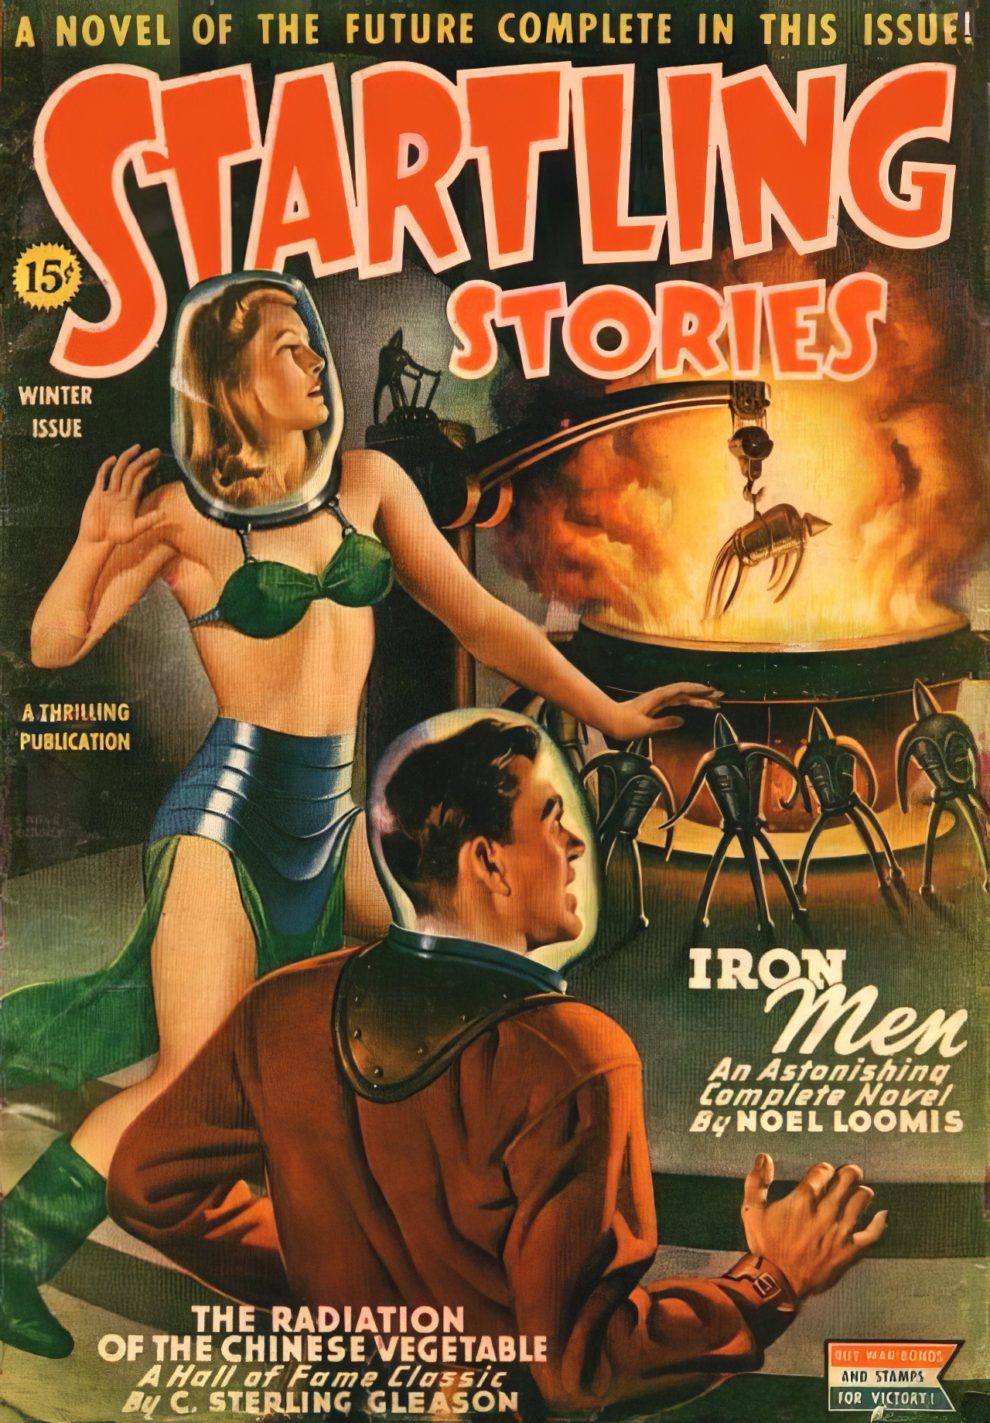 Startling Stories Covers 1940s 28 